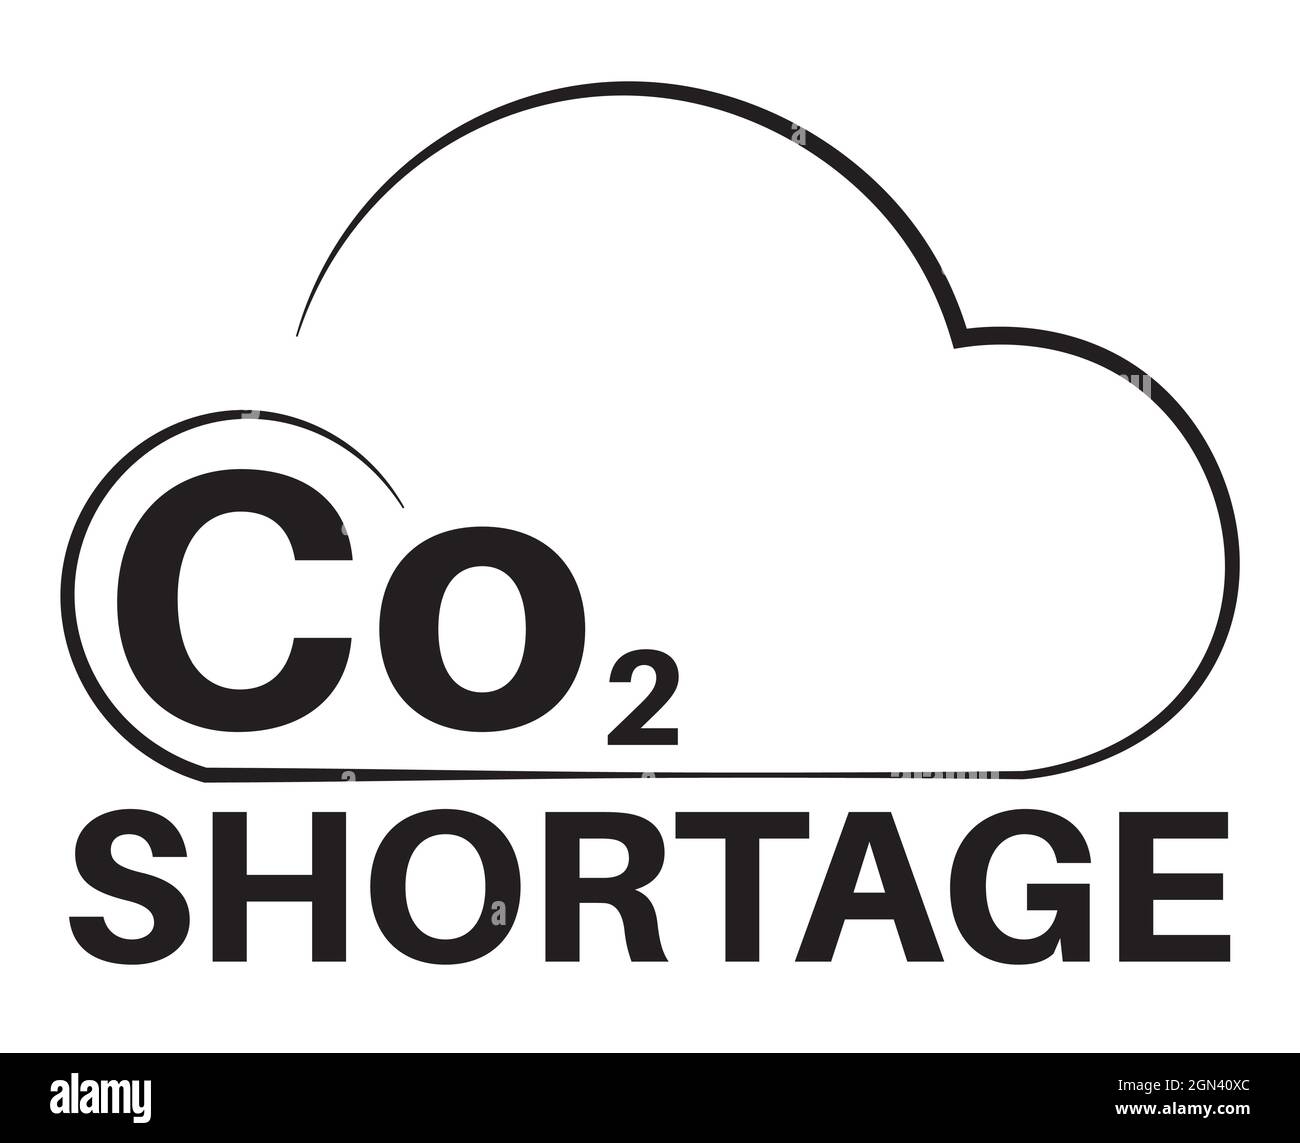 CO2 Gas Shortage vector illustration on a white background Stock Vector